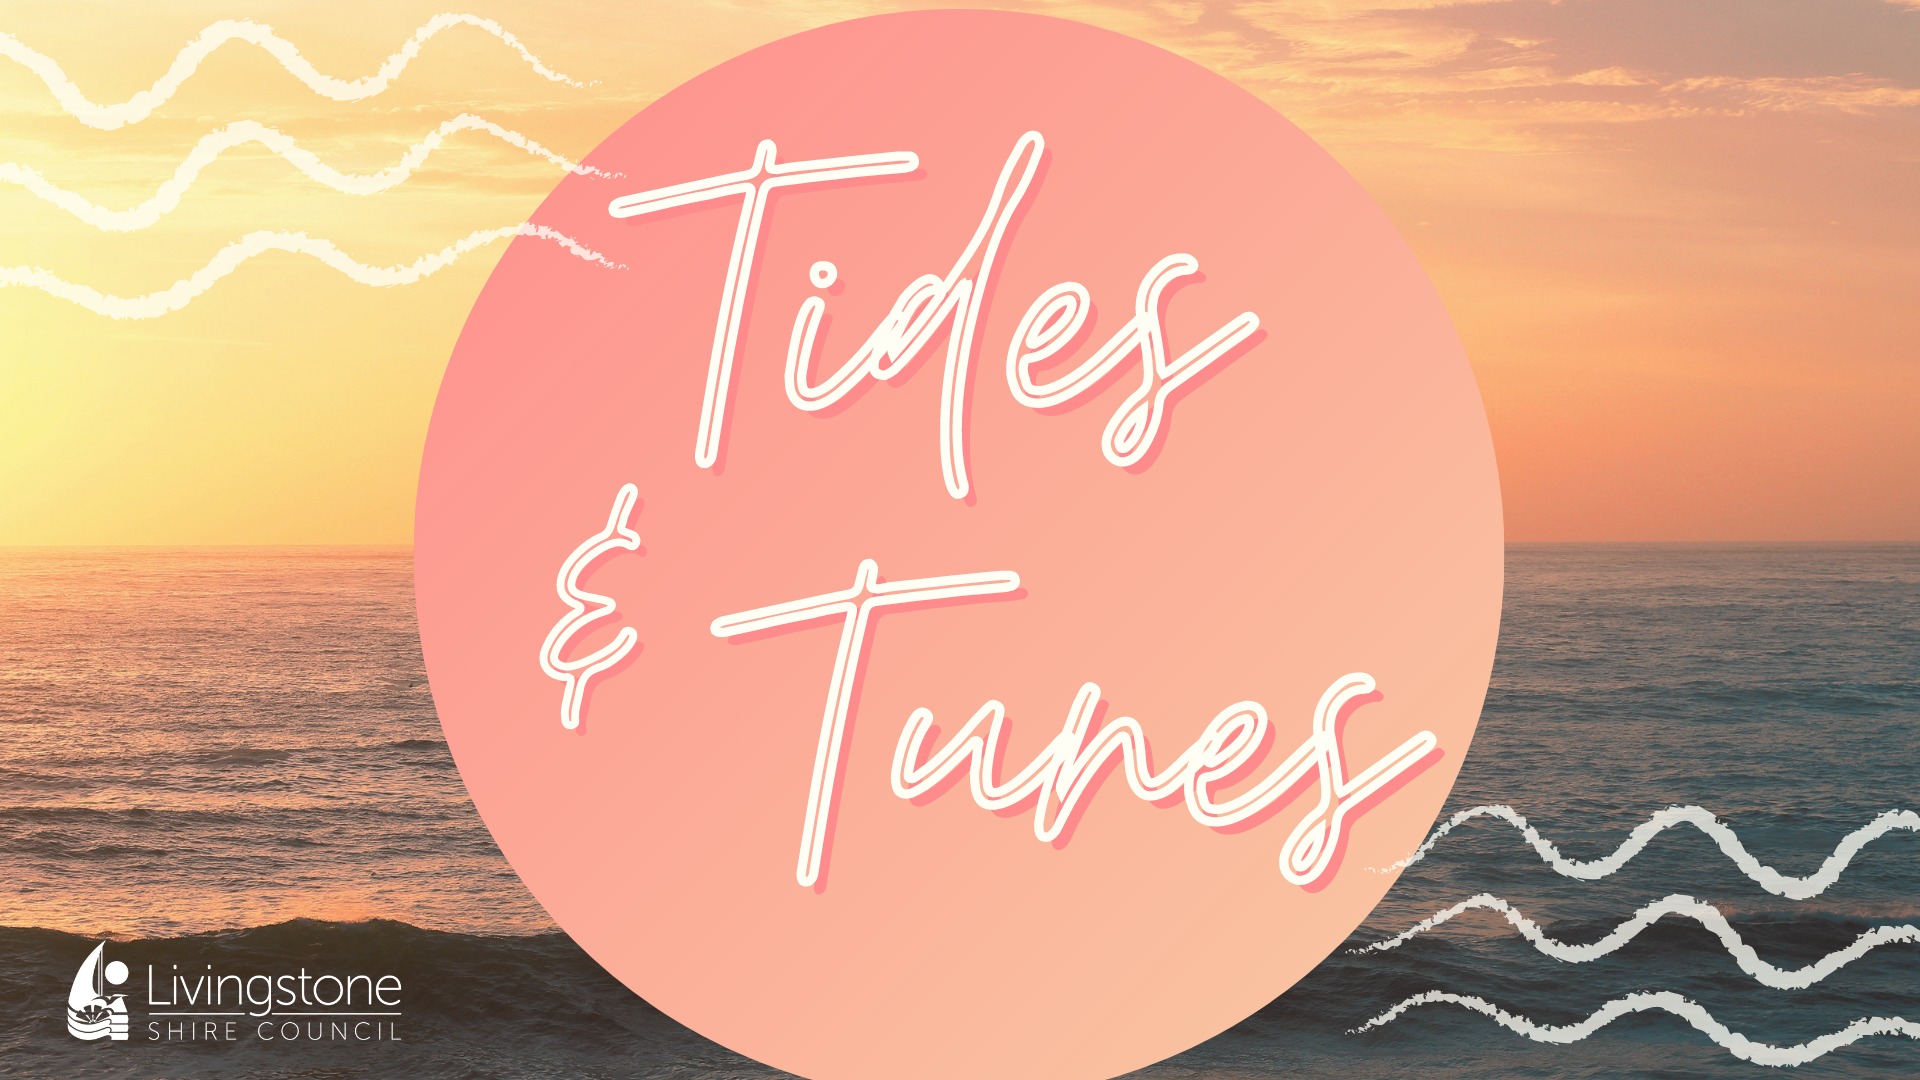 Tides and tunes fb event cover